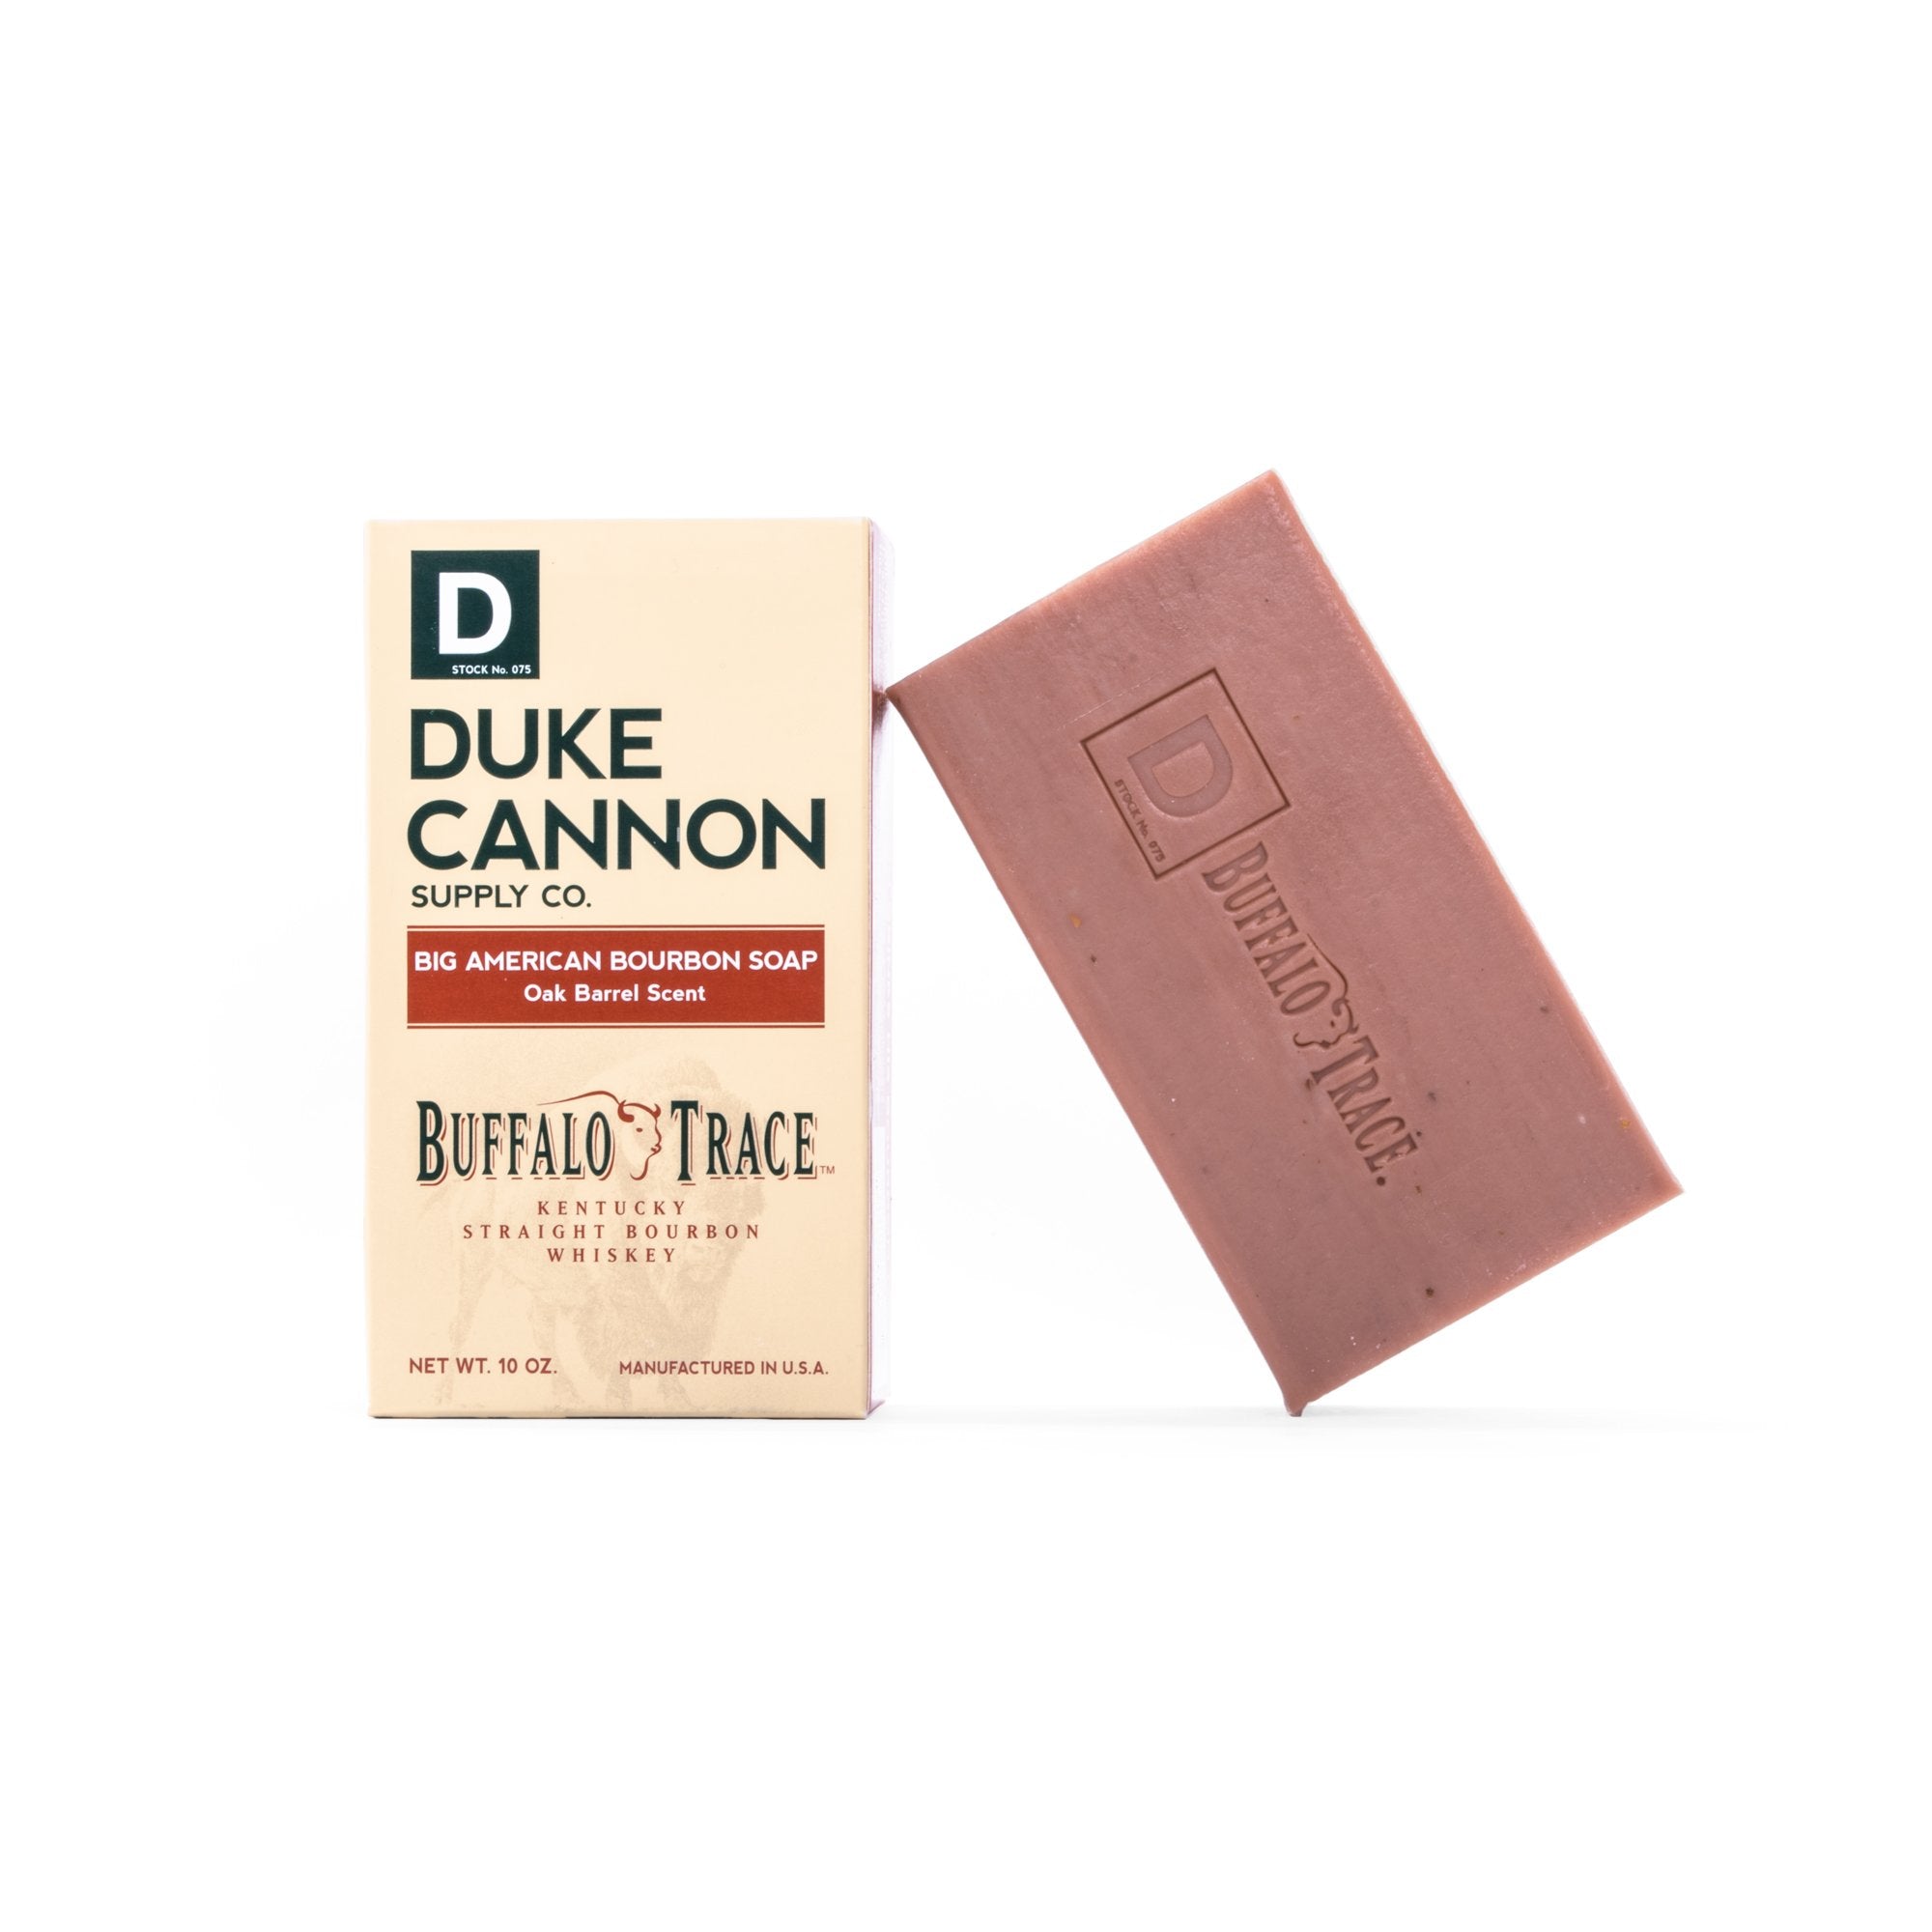 Big Ass Brick of Soap by Duke Cannon